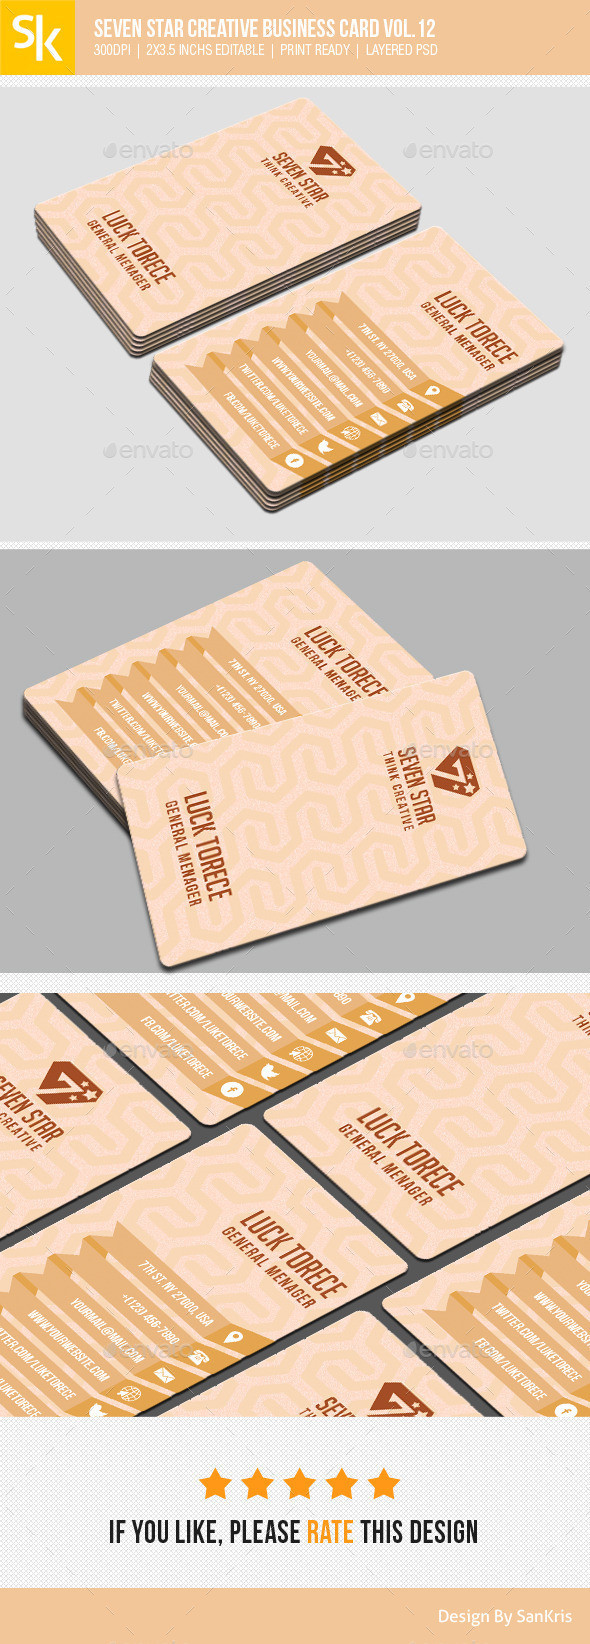 Seven star creative business card vol.12 preview